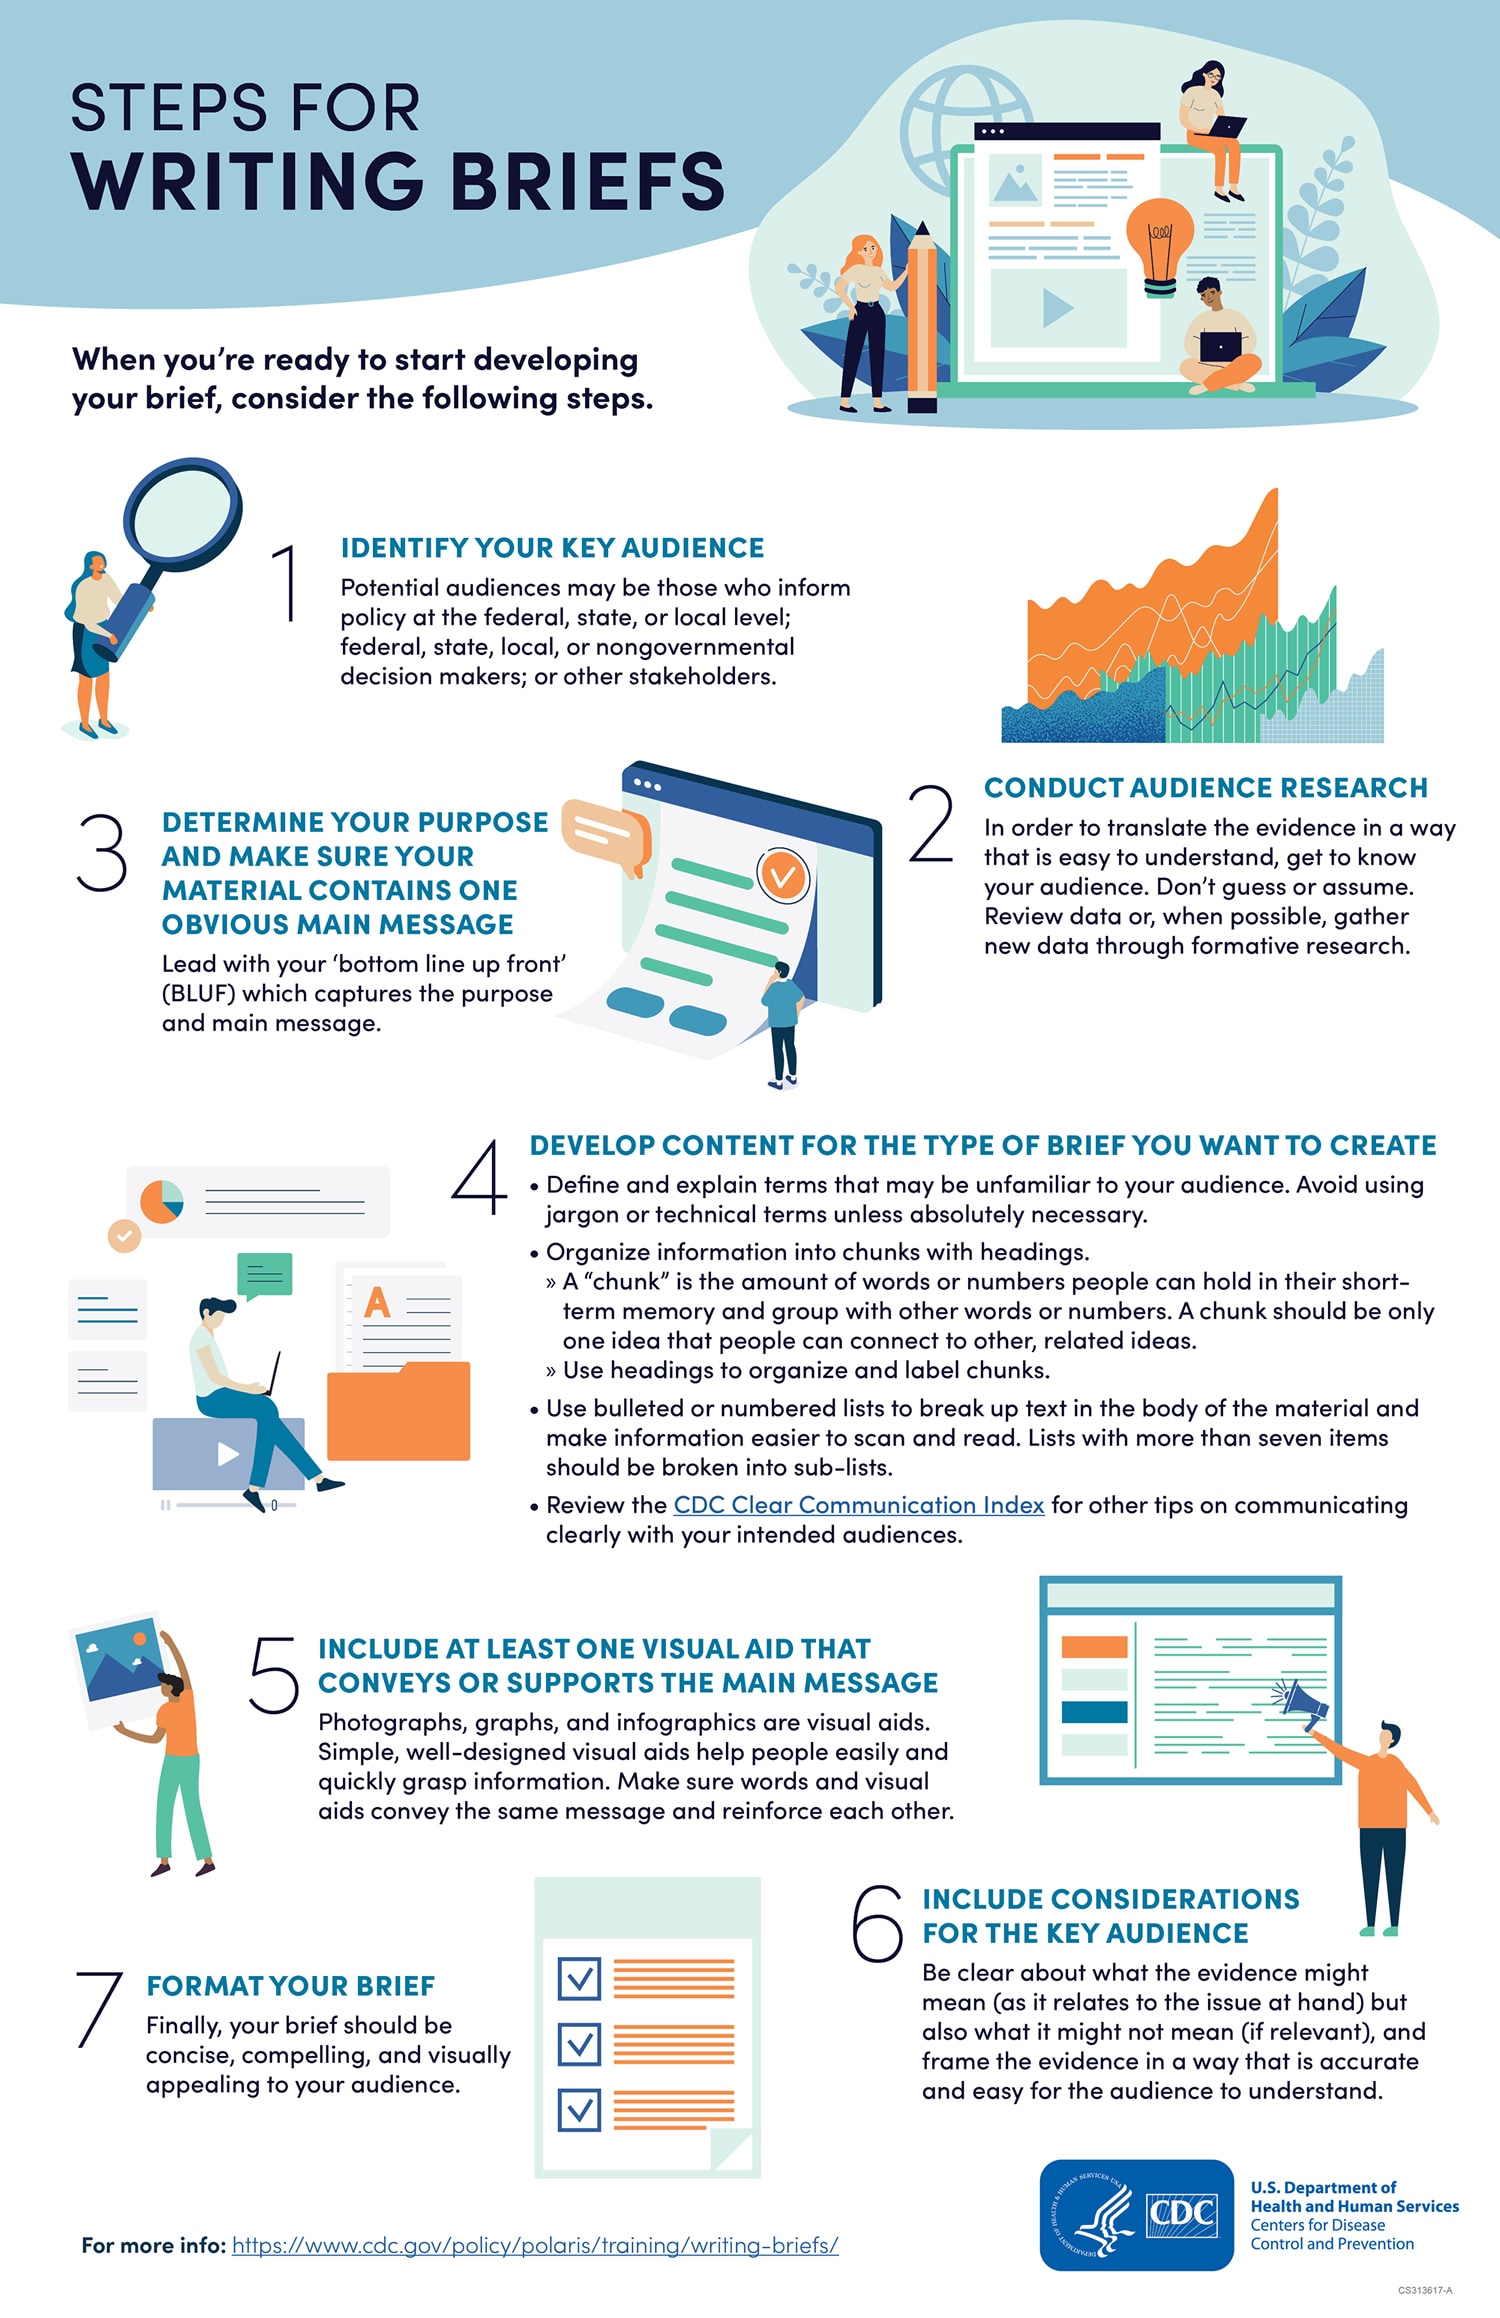 steps for writing briefs infographic-see following paragraph for text